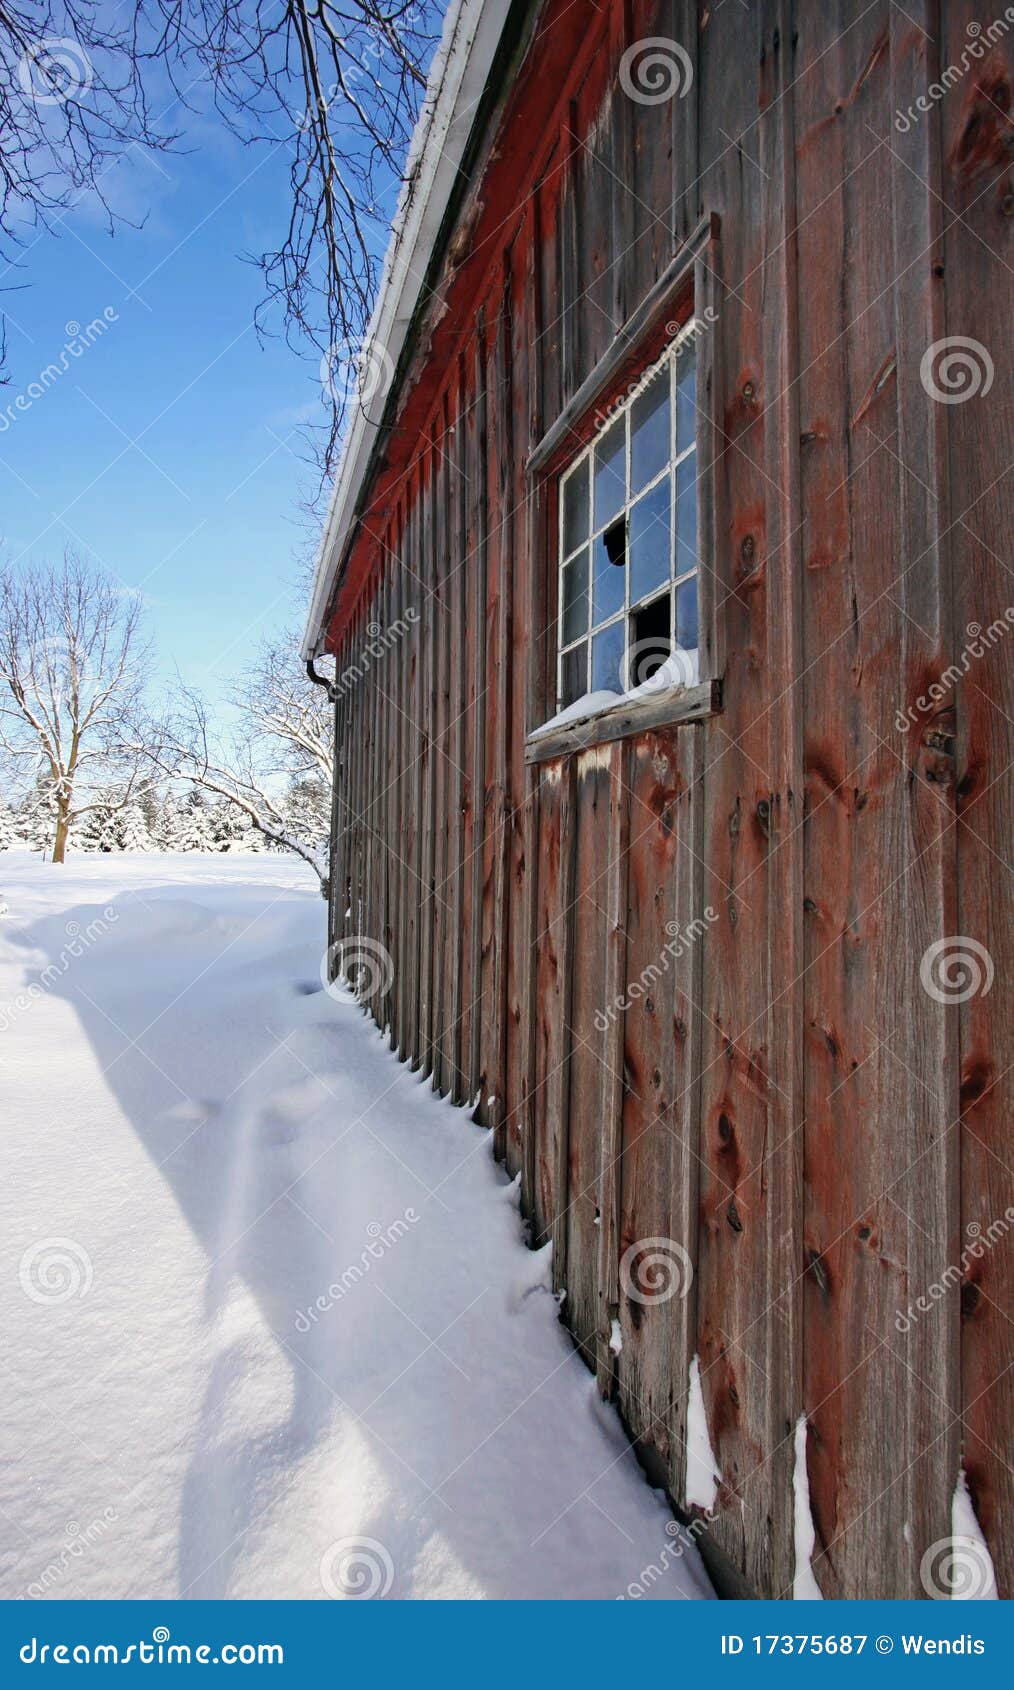 Royalty Free Stock Photography: A small wooden shed